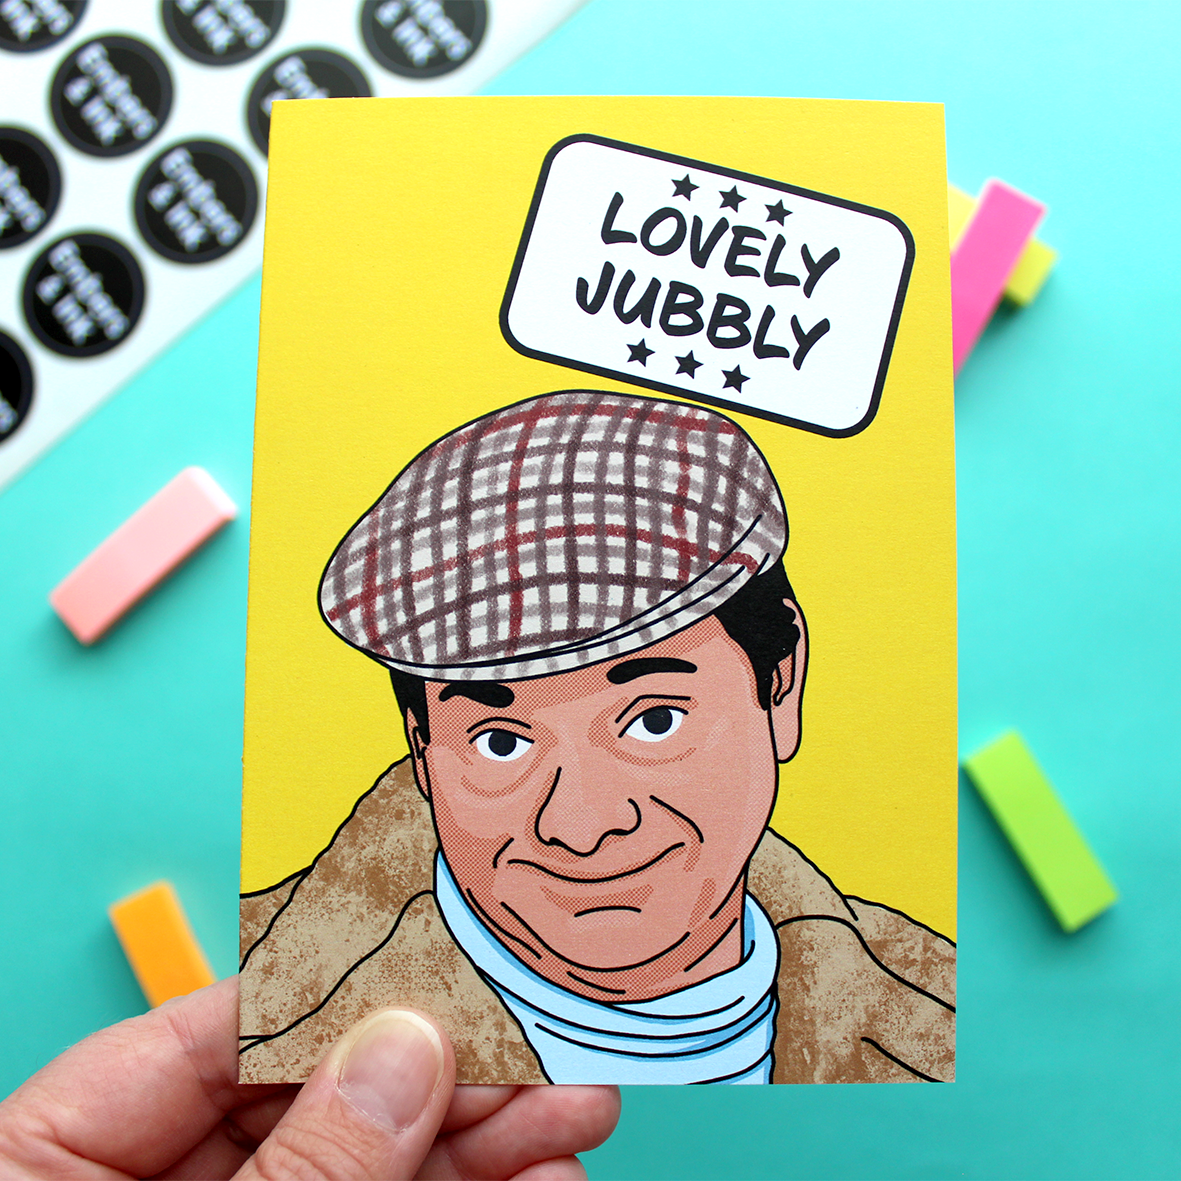 A hand holds a yellow card with an illustration of Del Boy from a well known 80s TV programme. Above him in a white box are the words ‘Lovely Jubbly’